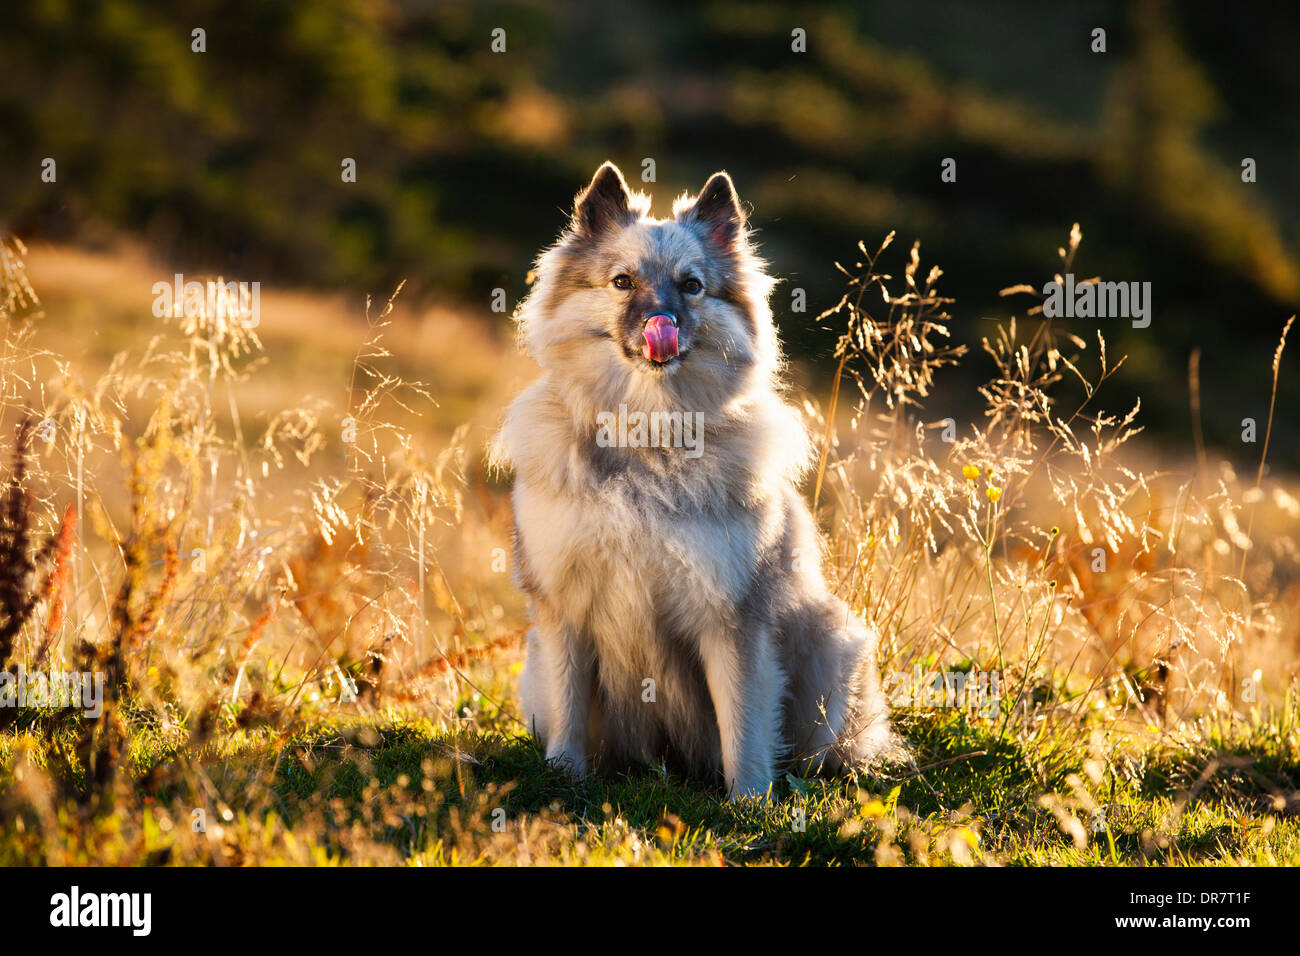 Keeshond or Wolfsspitz licking its mouth, backlit, Austria Stock Photo